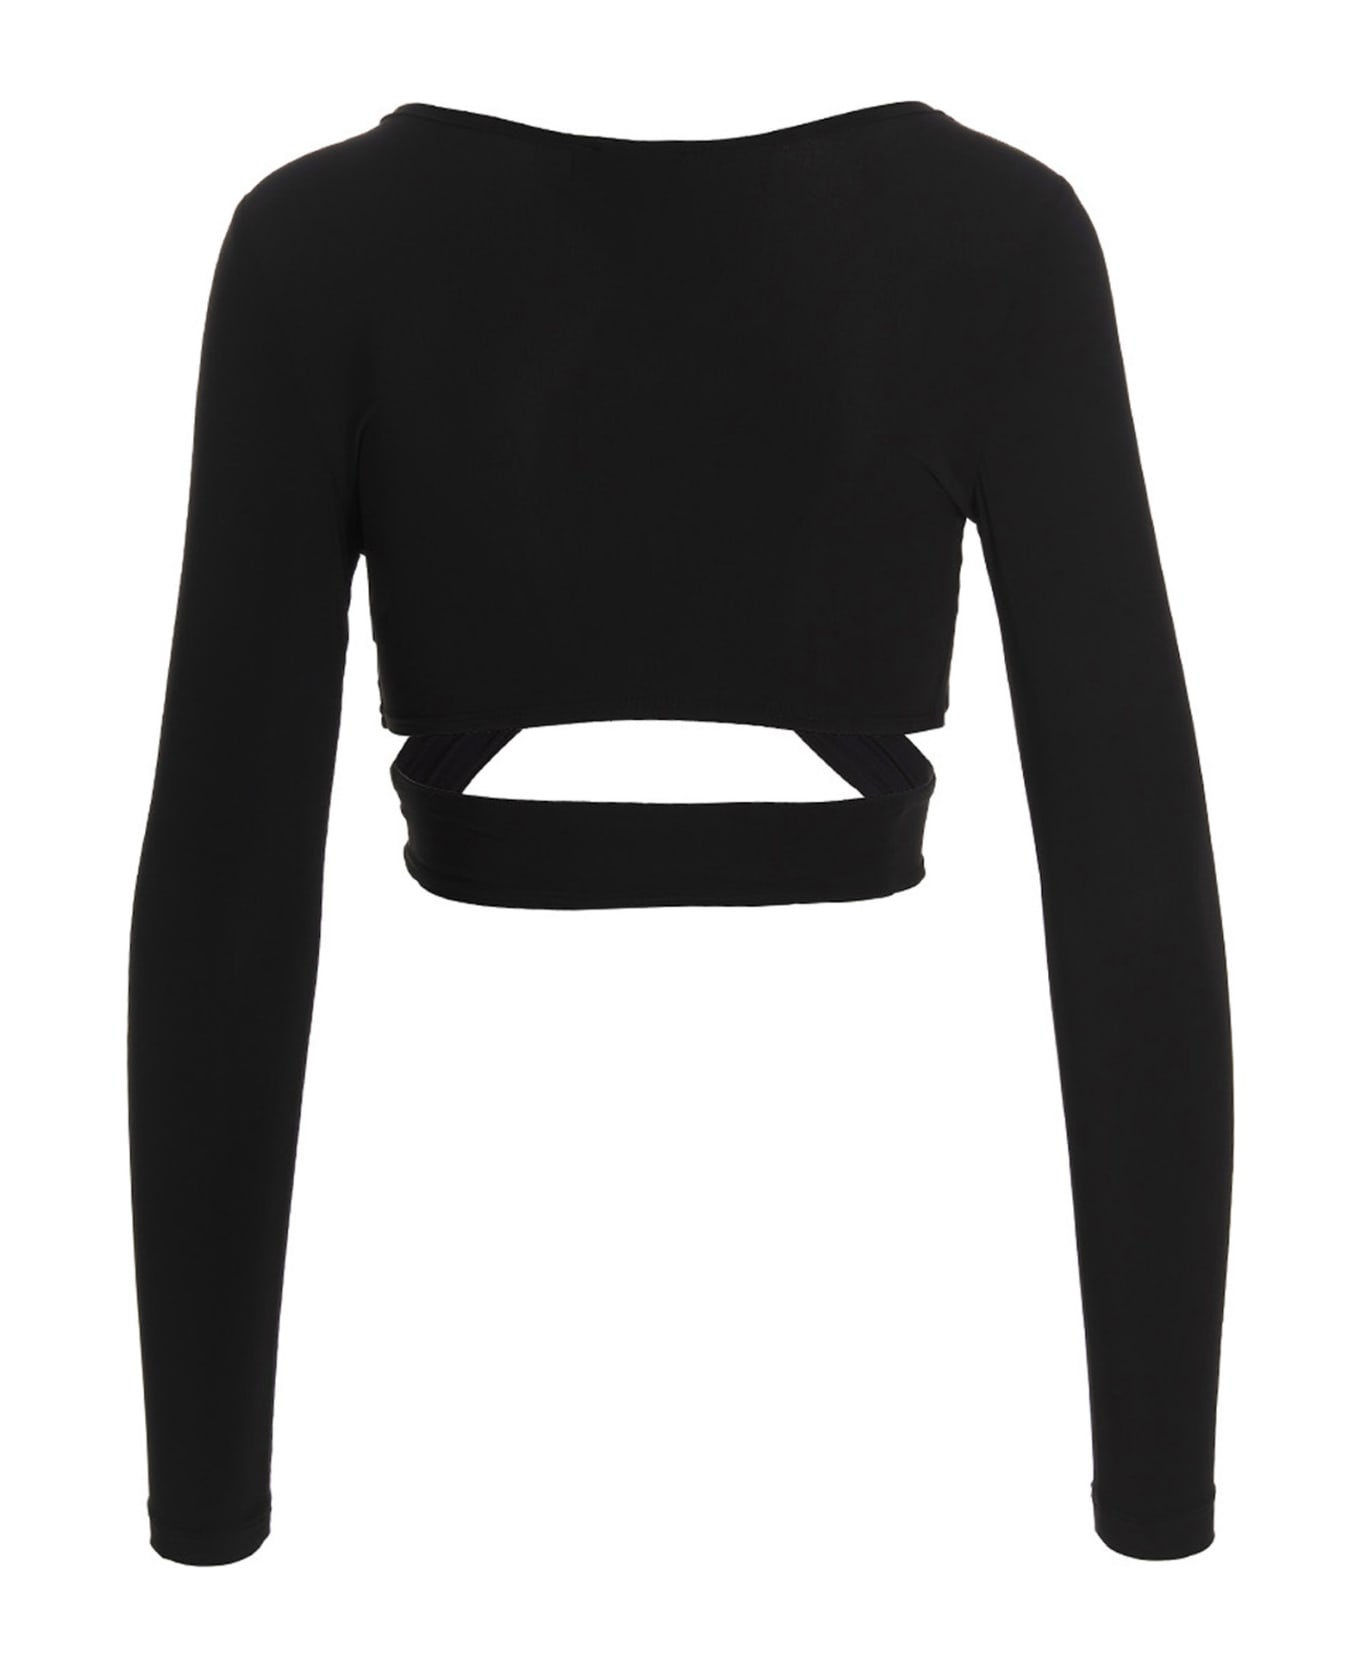 Atlein Crossed Cropped Top - Black  